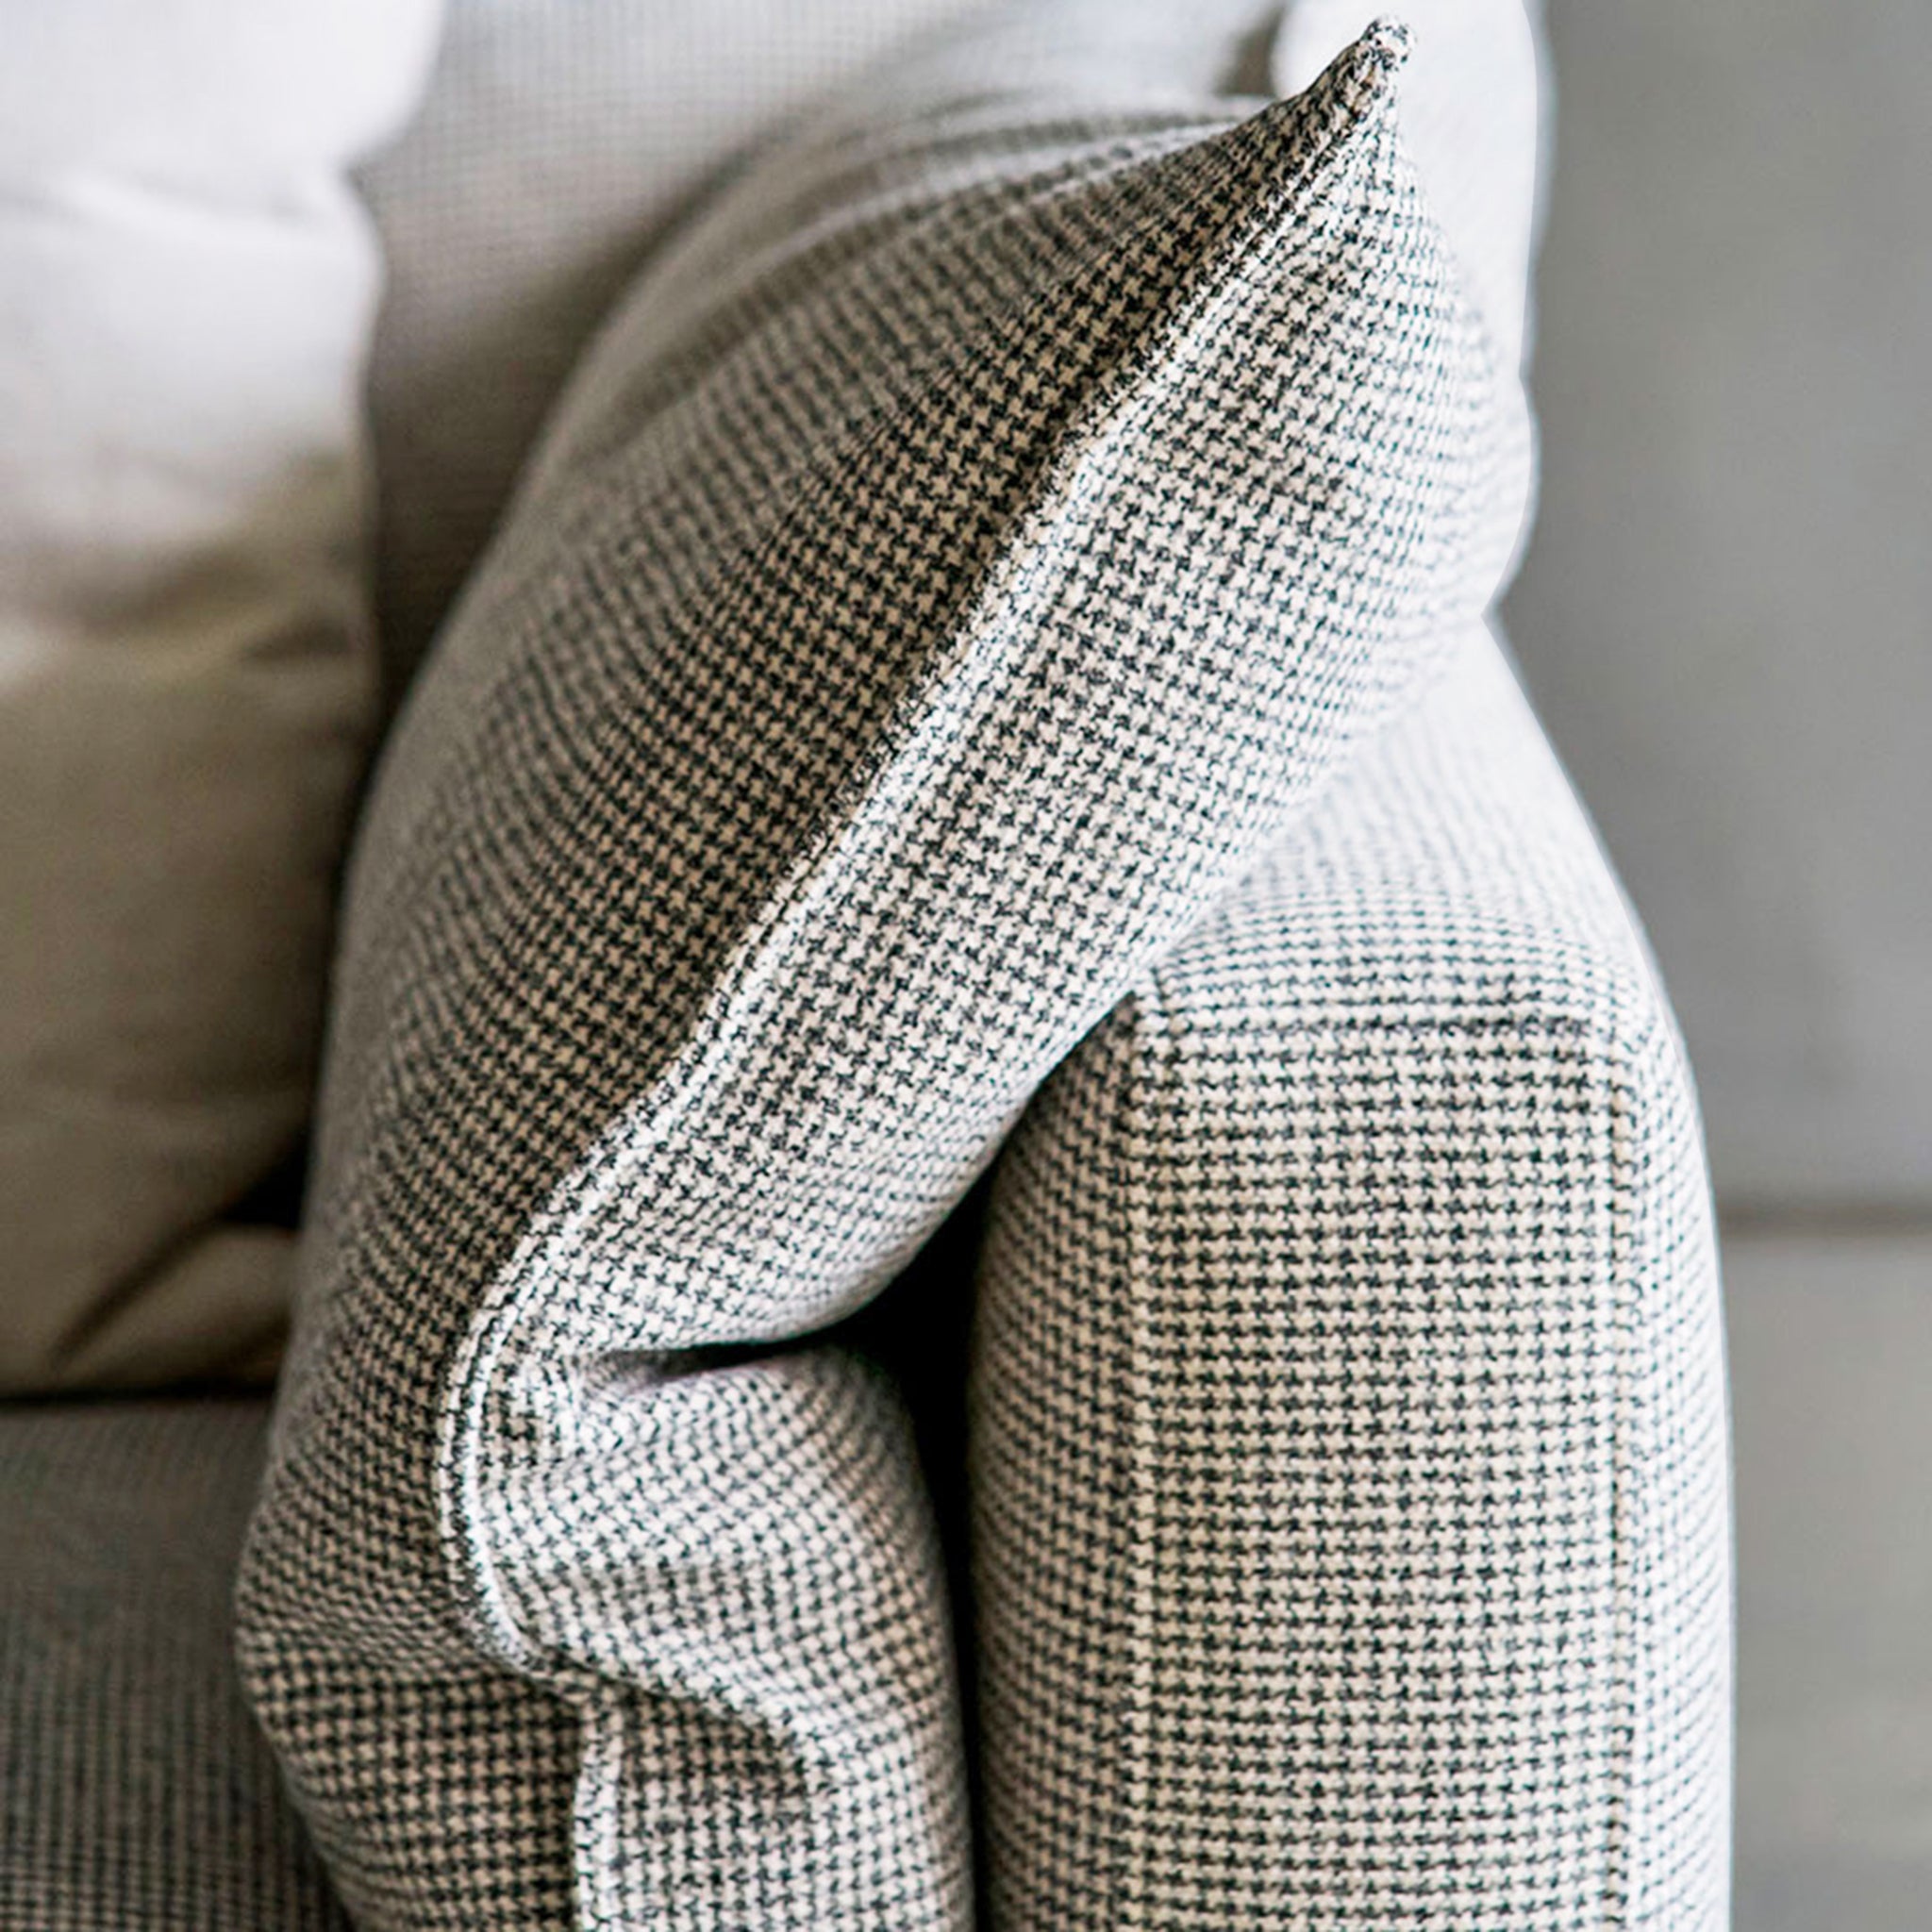 Close-up view of a stylish houndstooth-patterned cushion on a modern sofa, highlighting the fabric texture and detailed stitching for a cozy and elegant living room setup.